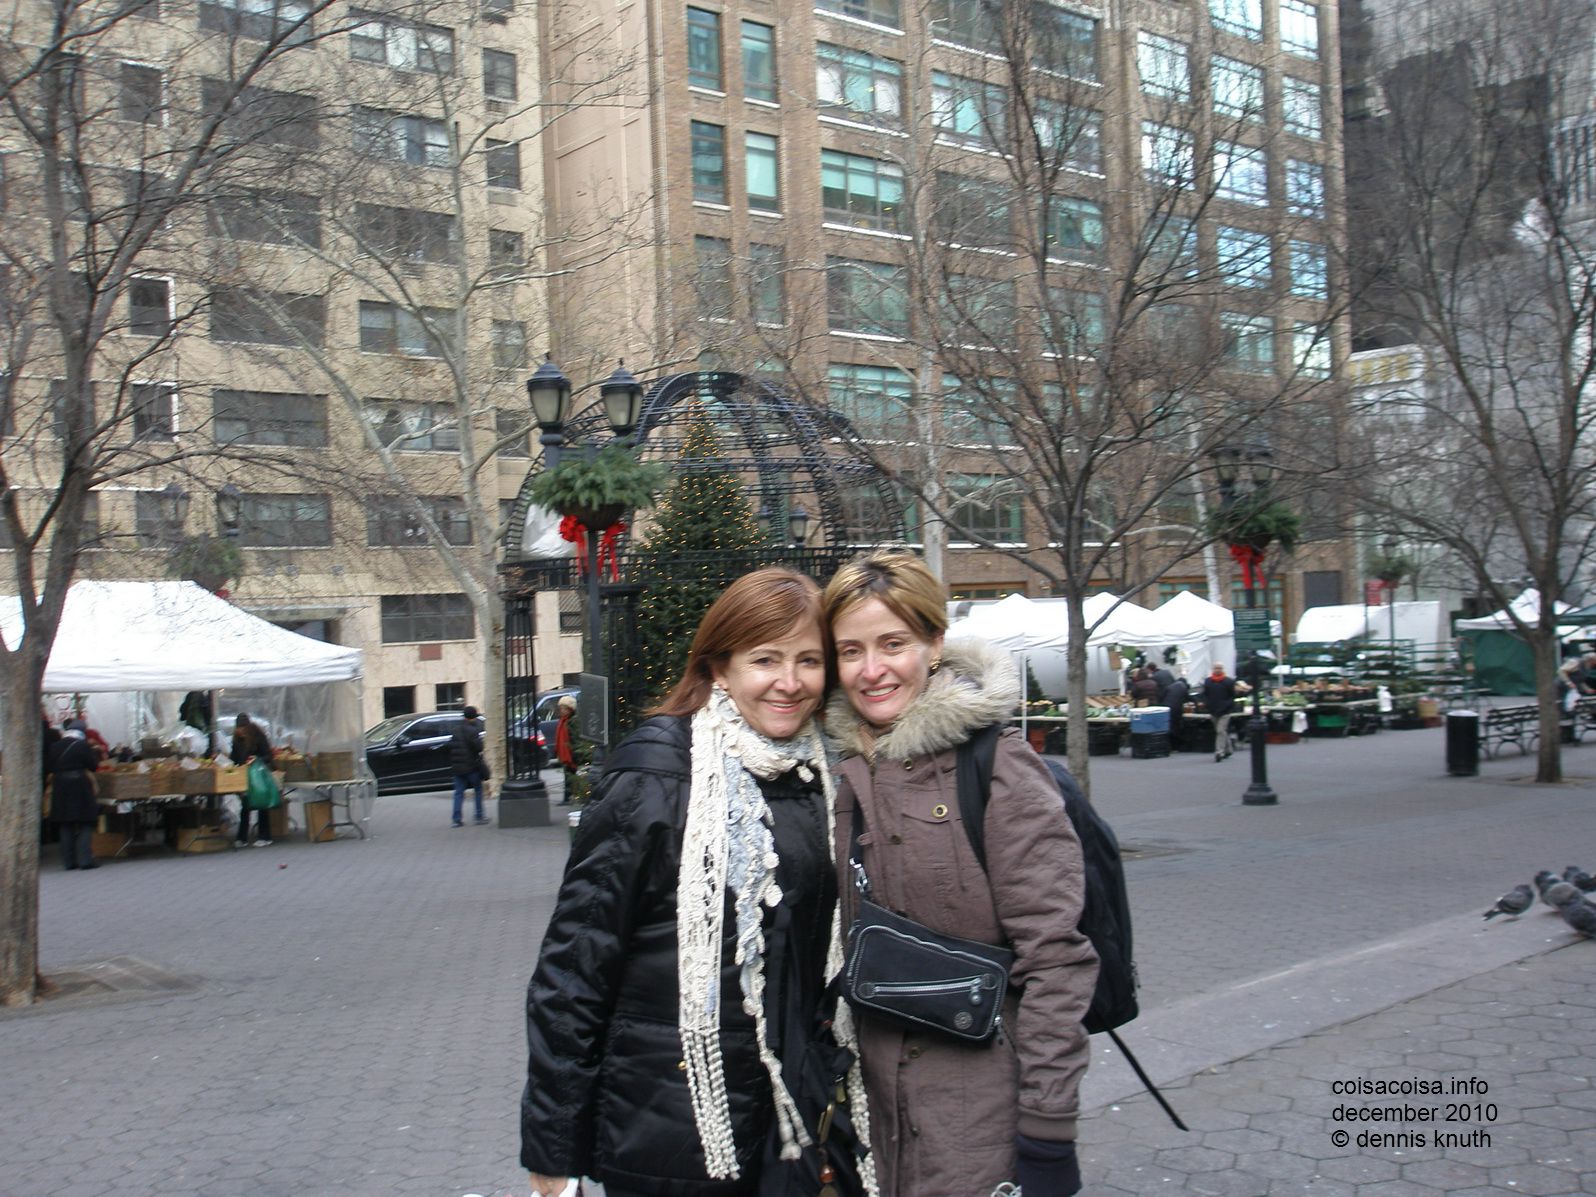 Lisette and Concinha in Herald Square